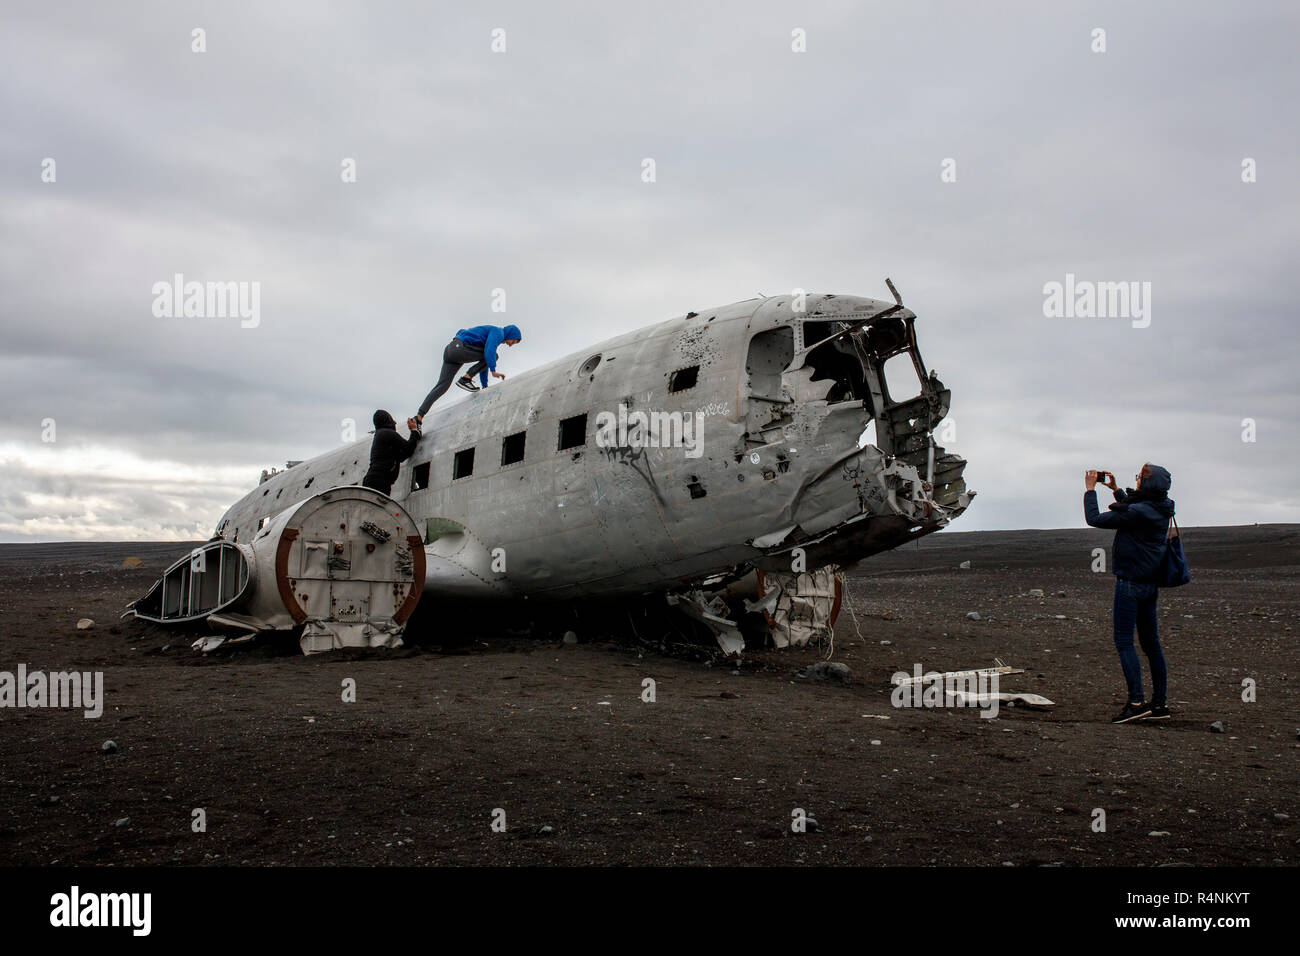 Tourists climb on top of the wreckage of a US Navy DC plane that crash landed on a beach in Southern Iceland on November 21, 1973. The place crashed as a result of either low fuel or icing on the engines and all aboard survived. After the crash the Navy stripped the plane of engines and other valuable components but left the main fuselage on the black sand beach near Solheimasandur. Today, due in large part to geotagging from Instagram, the plane is a popular destination for photographers and adventure enthusiasts visiting Iceland. Stock Photo